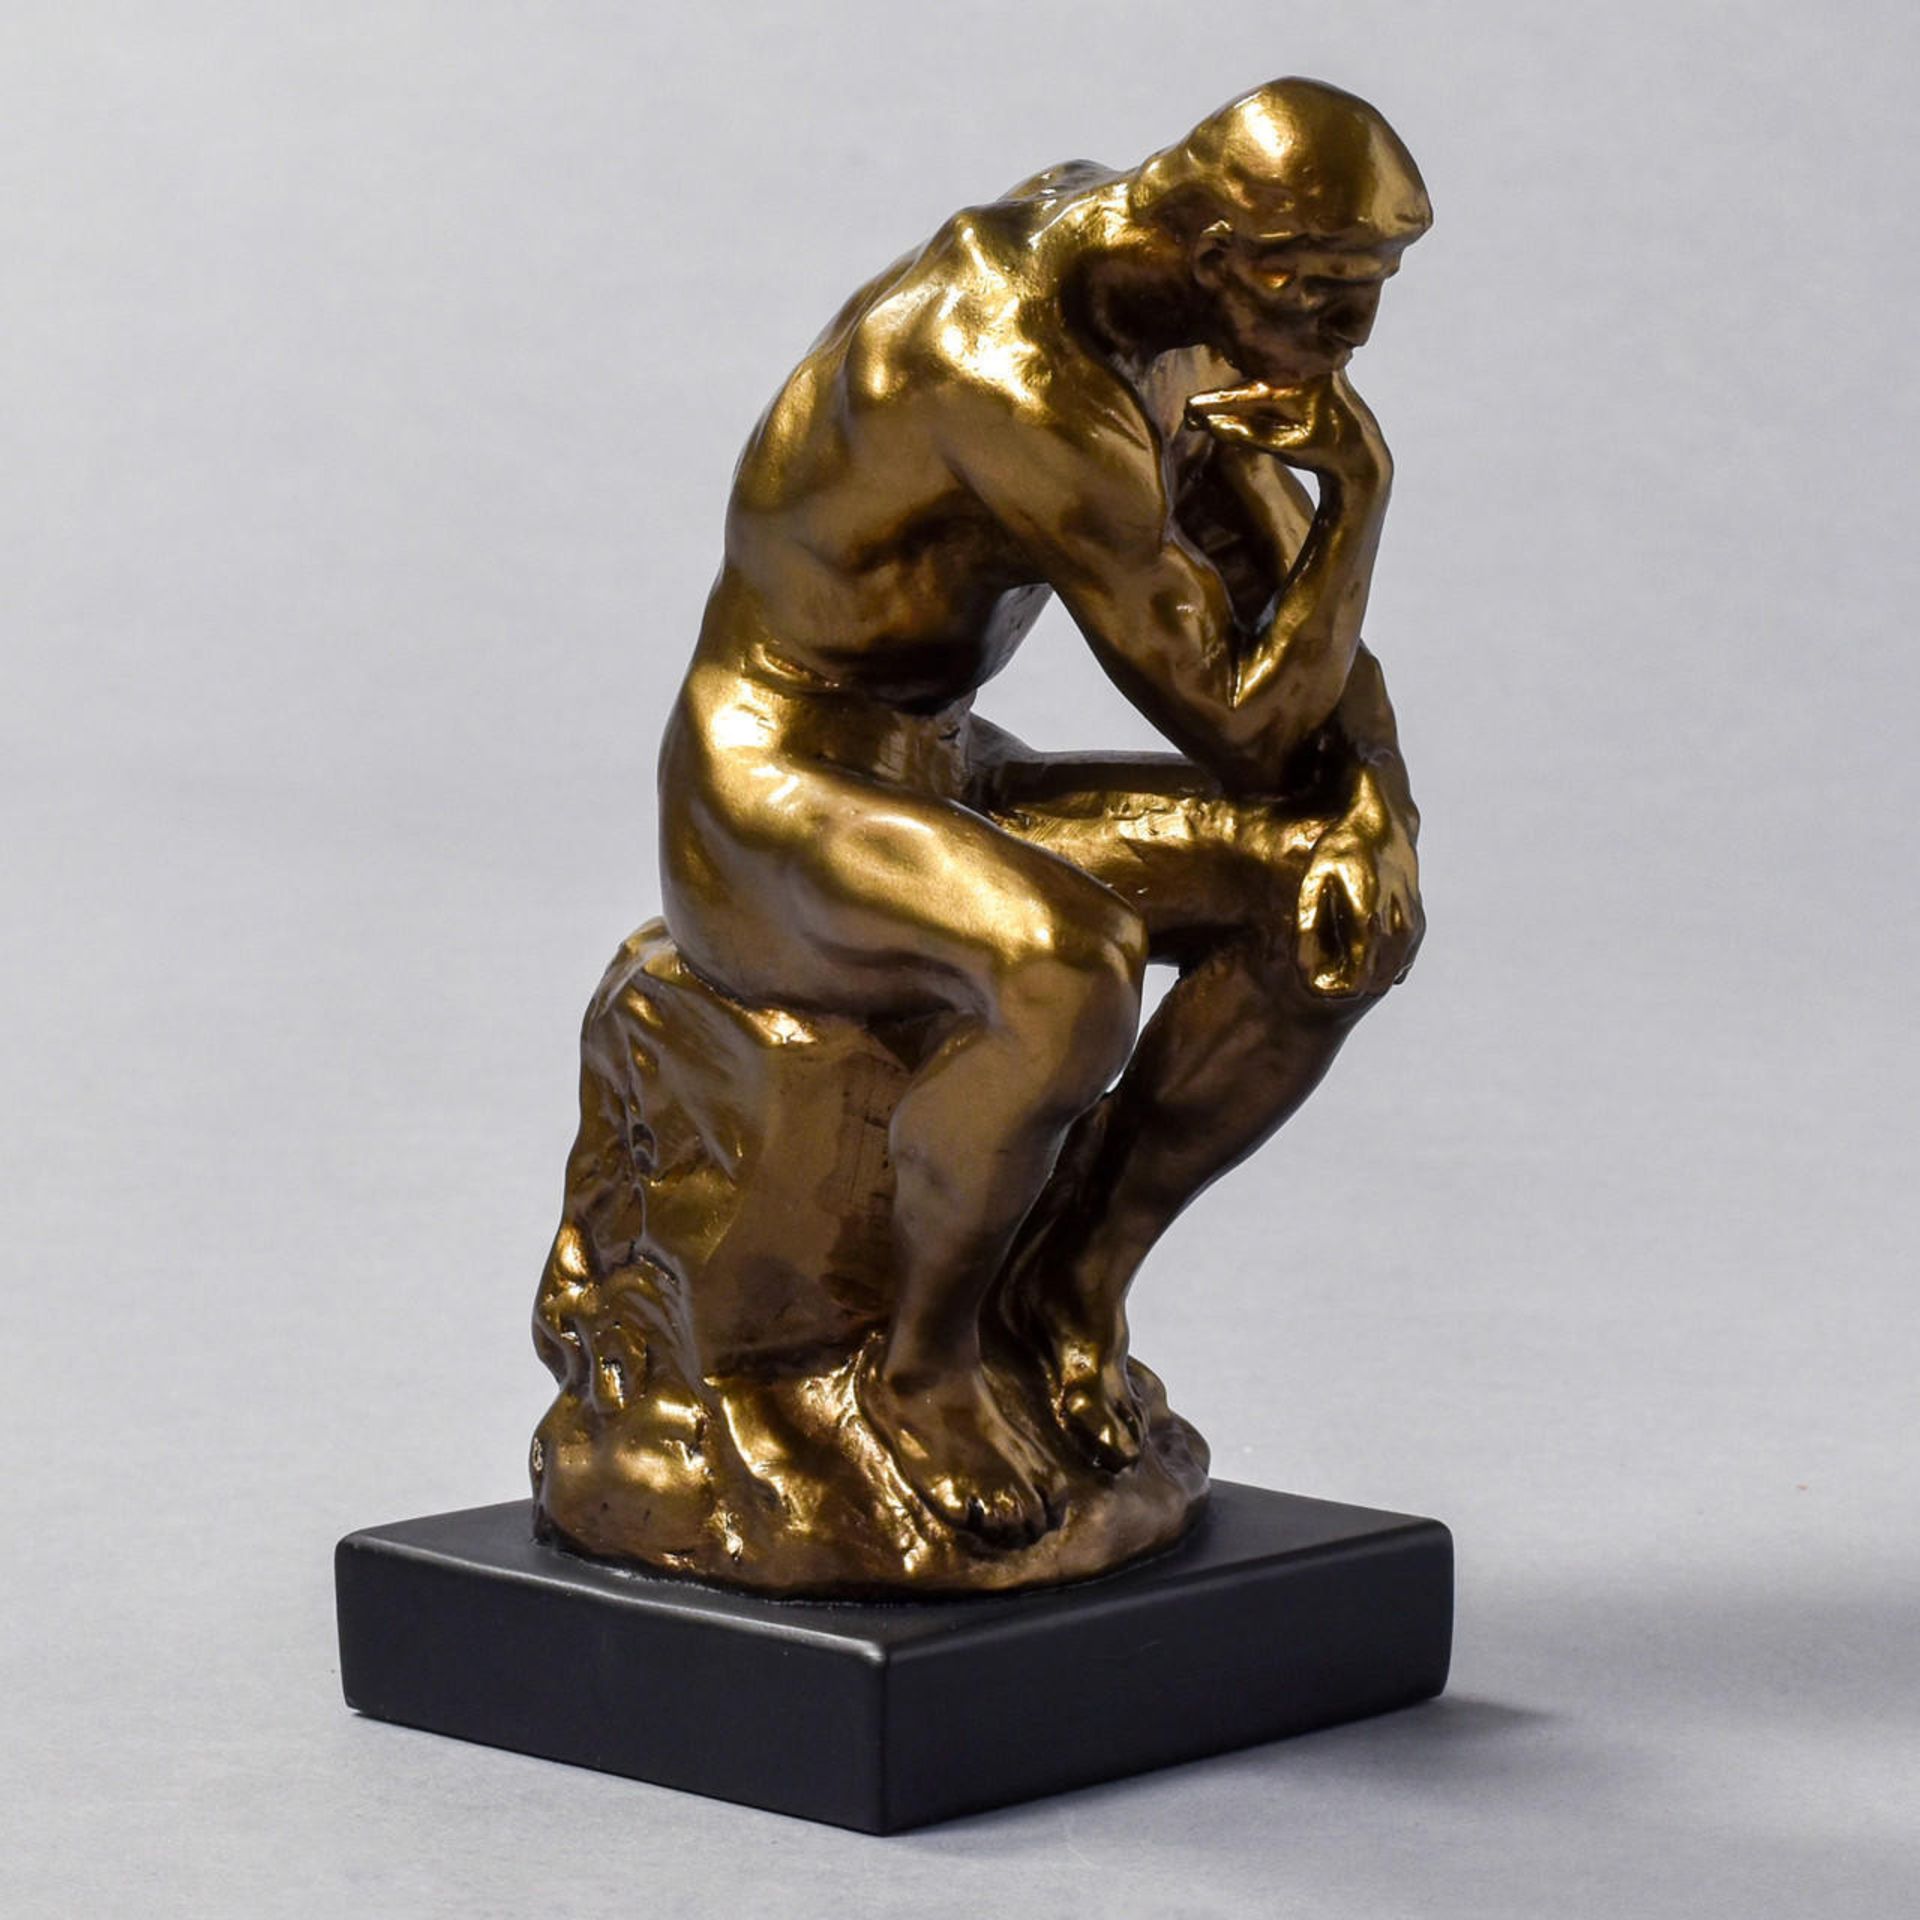 Auguste Rodin "The Thinker" Sculpture